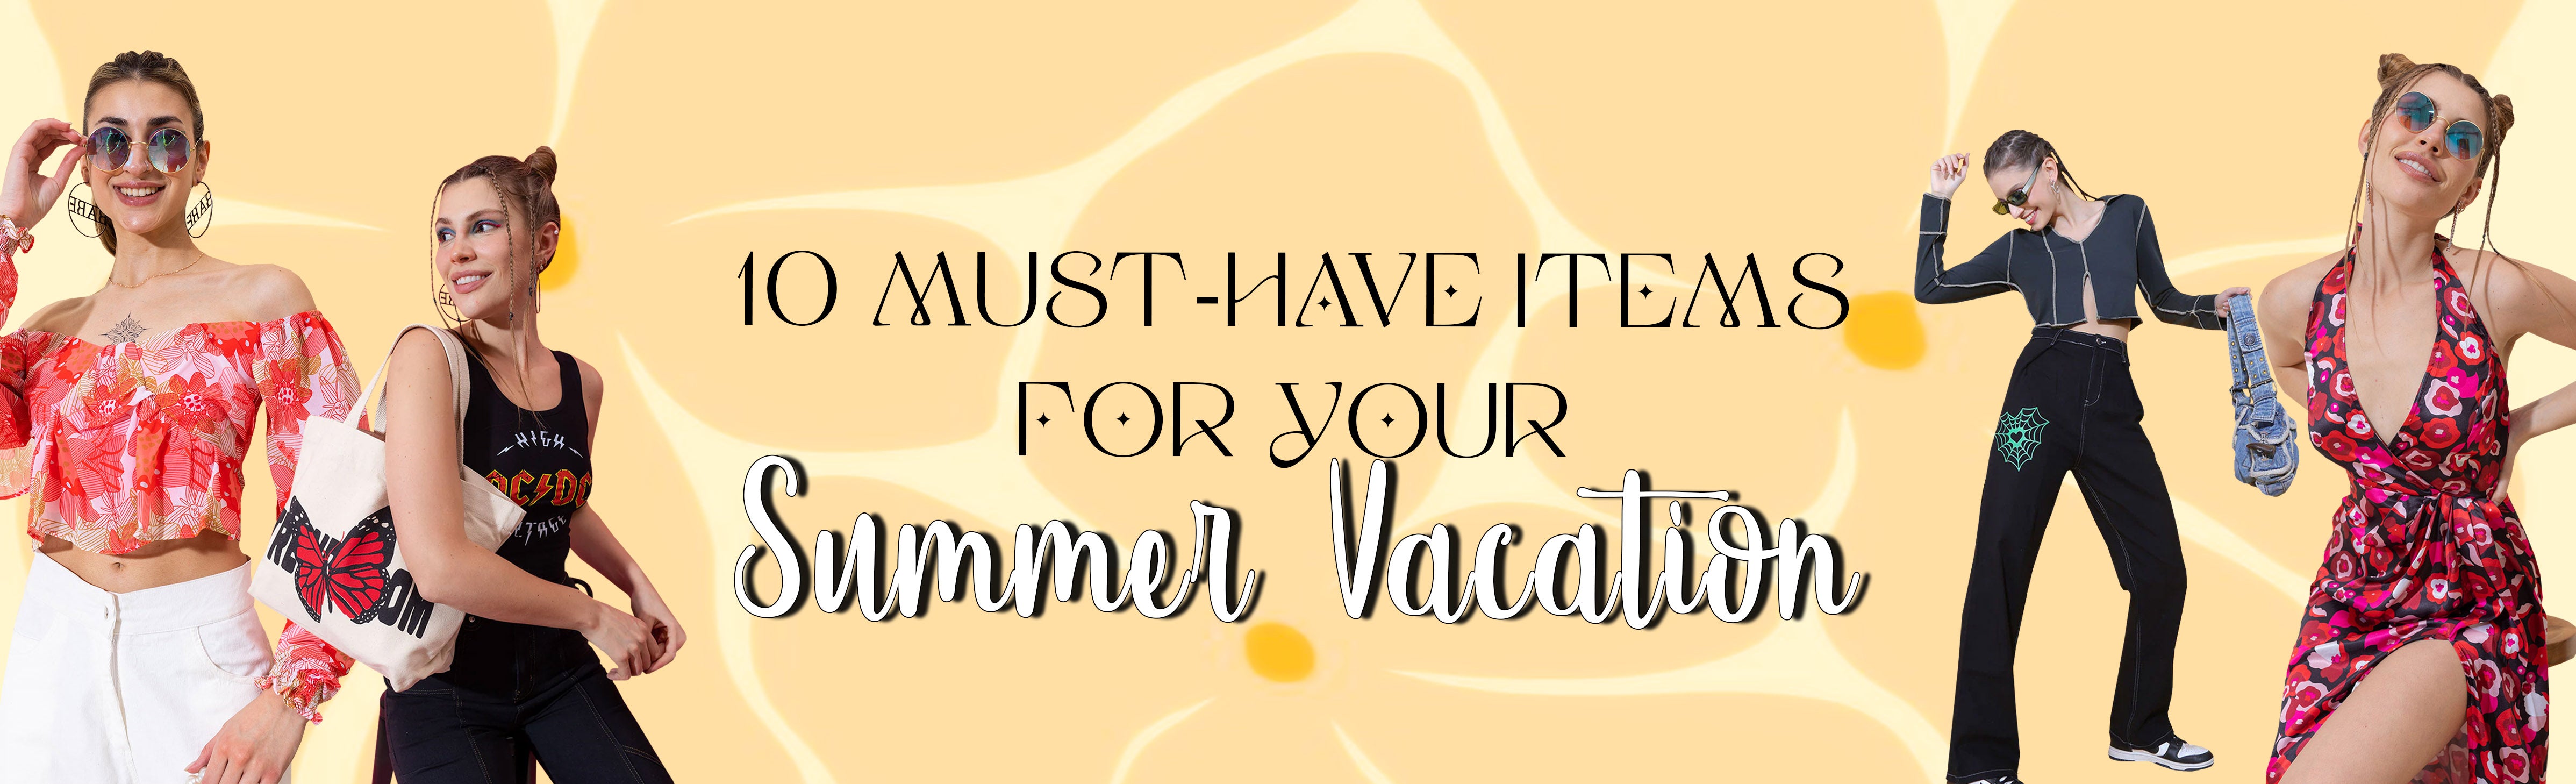 10 Must-Have Items for Your Summer Vacation